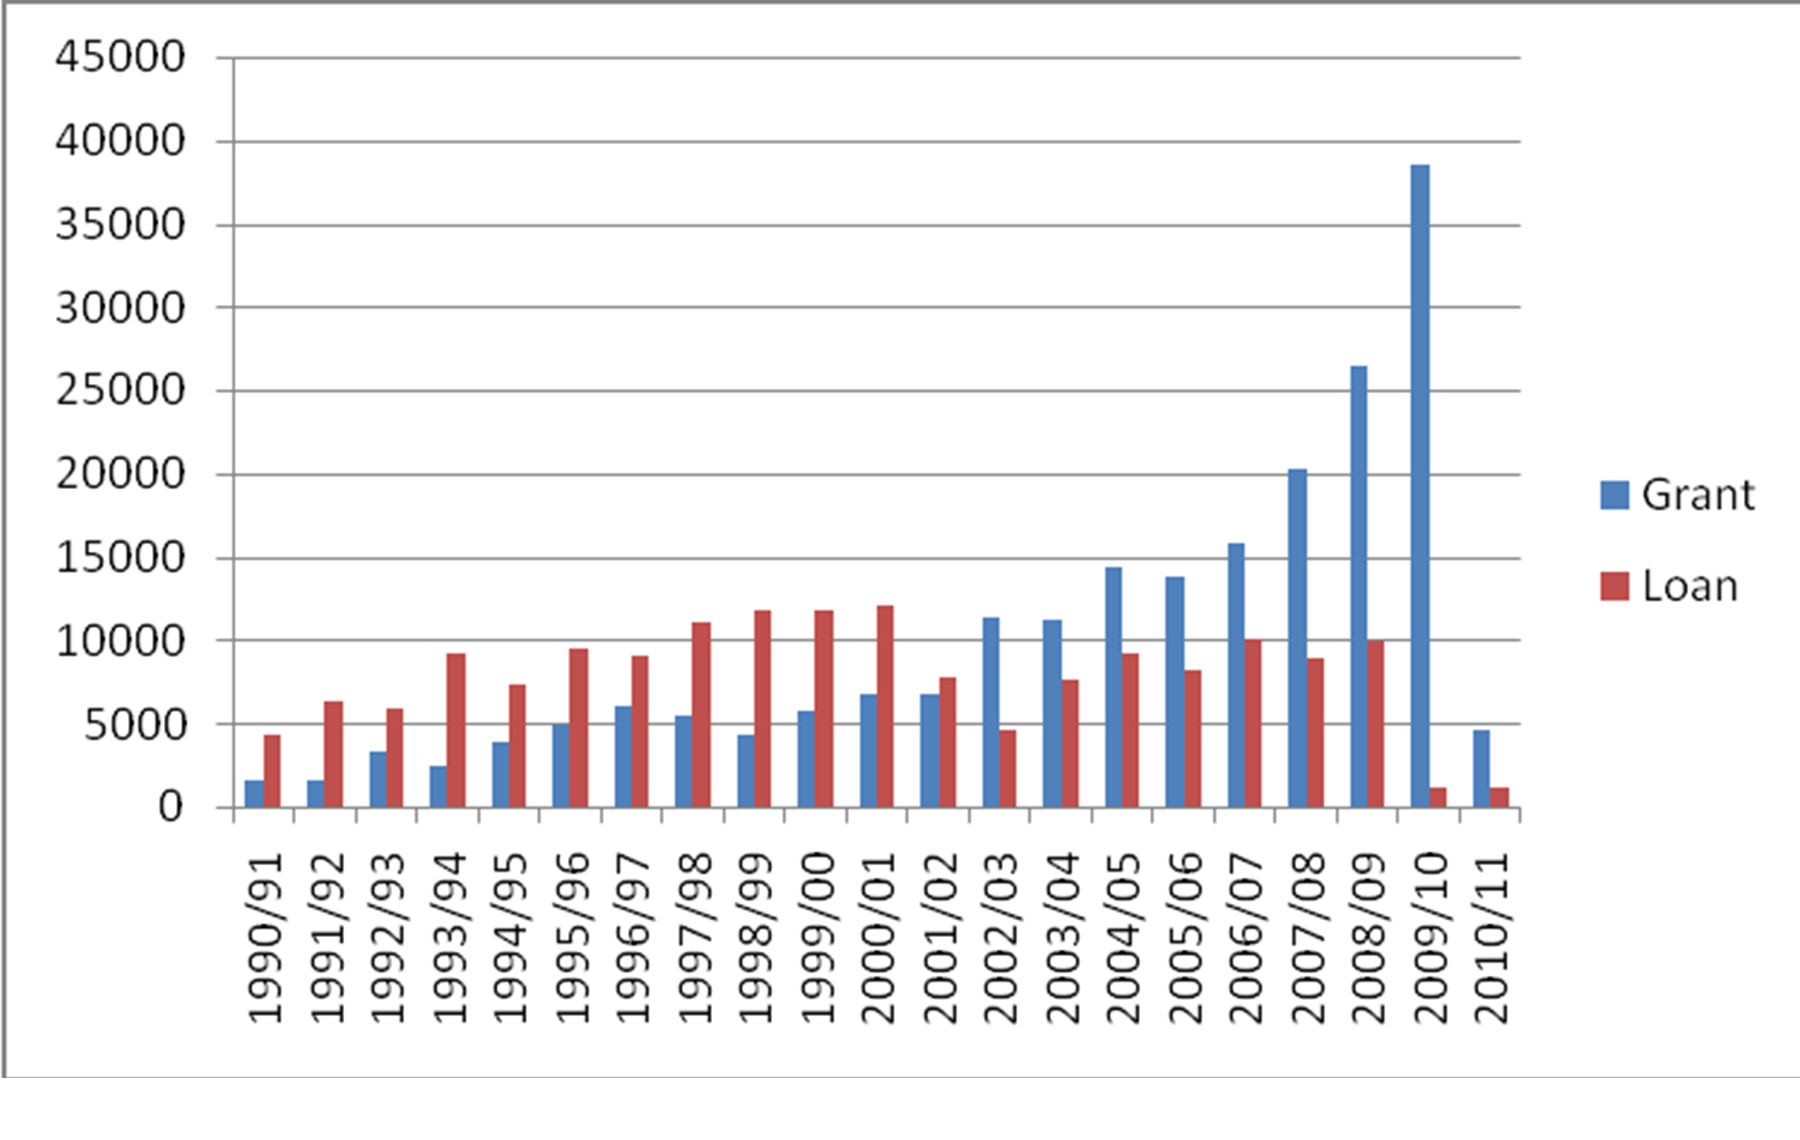 Figure 1: Trend and Pattern of Foreign Aid in Nepal